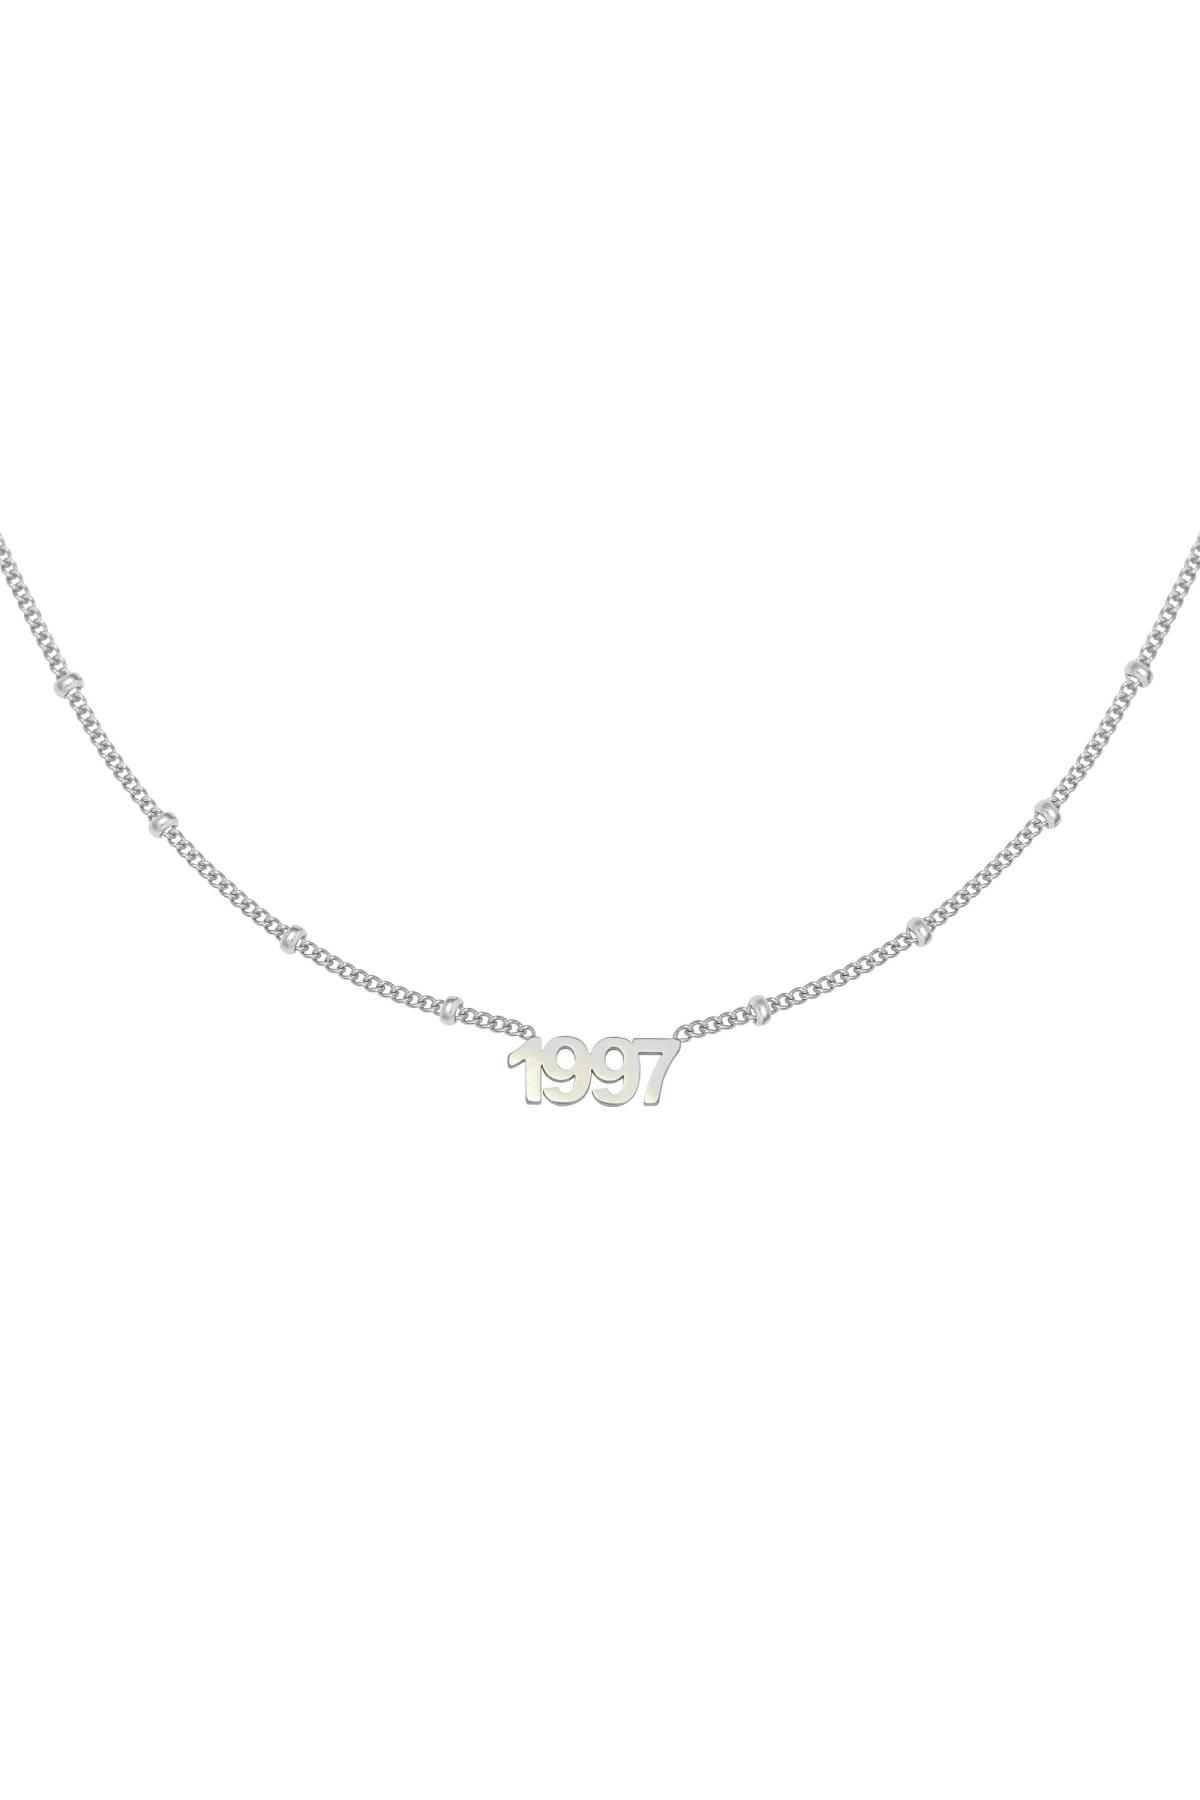 Necklace Year 1997 Silver Stainless Steel